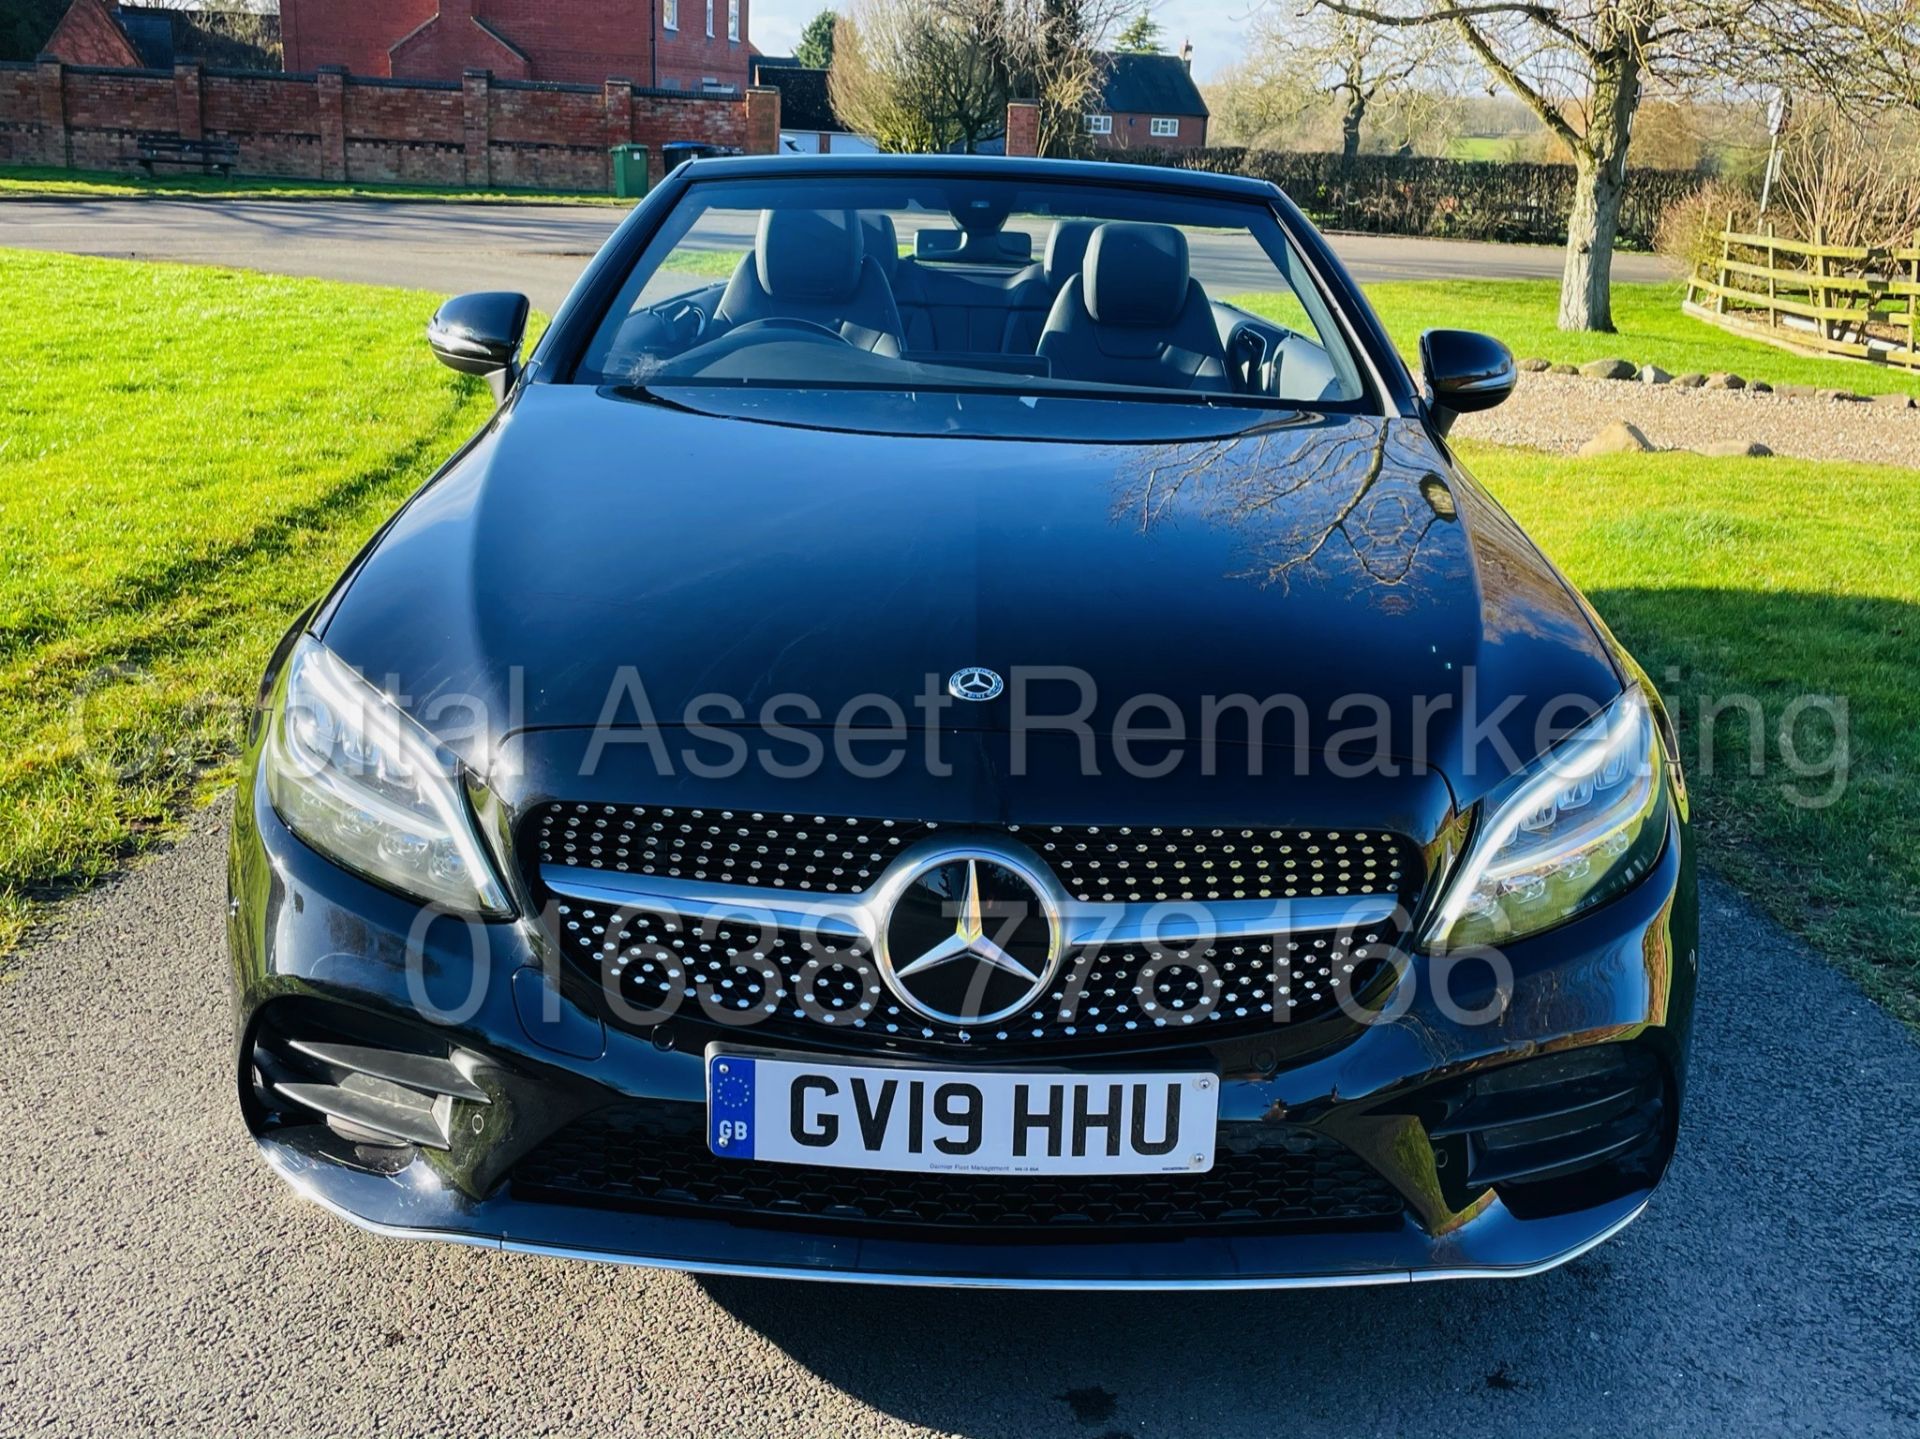 ON SALE MERCEDES-BENZ C220D *AMG LINE - CABRIOLET* (2019) '9G TRONIC AUTO - LEATHER - SAT NAV' - Image 27 of 59